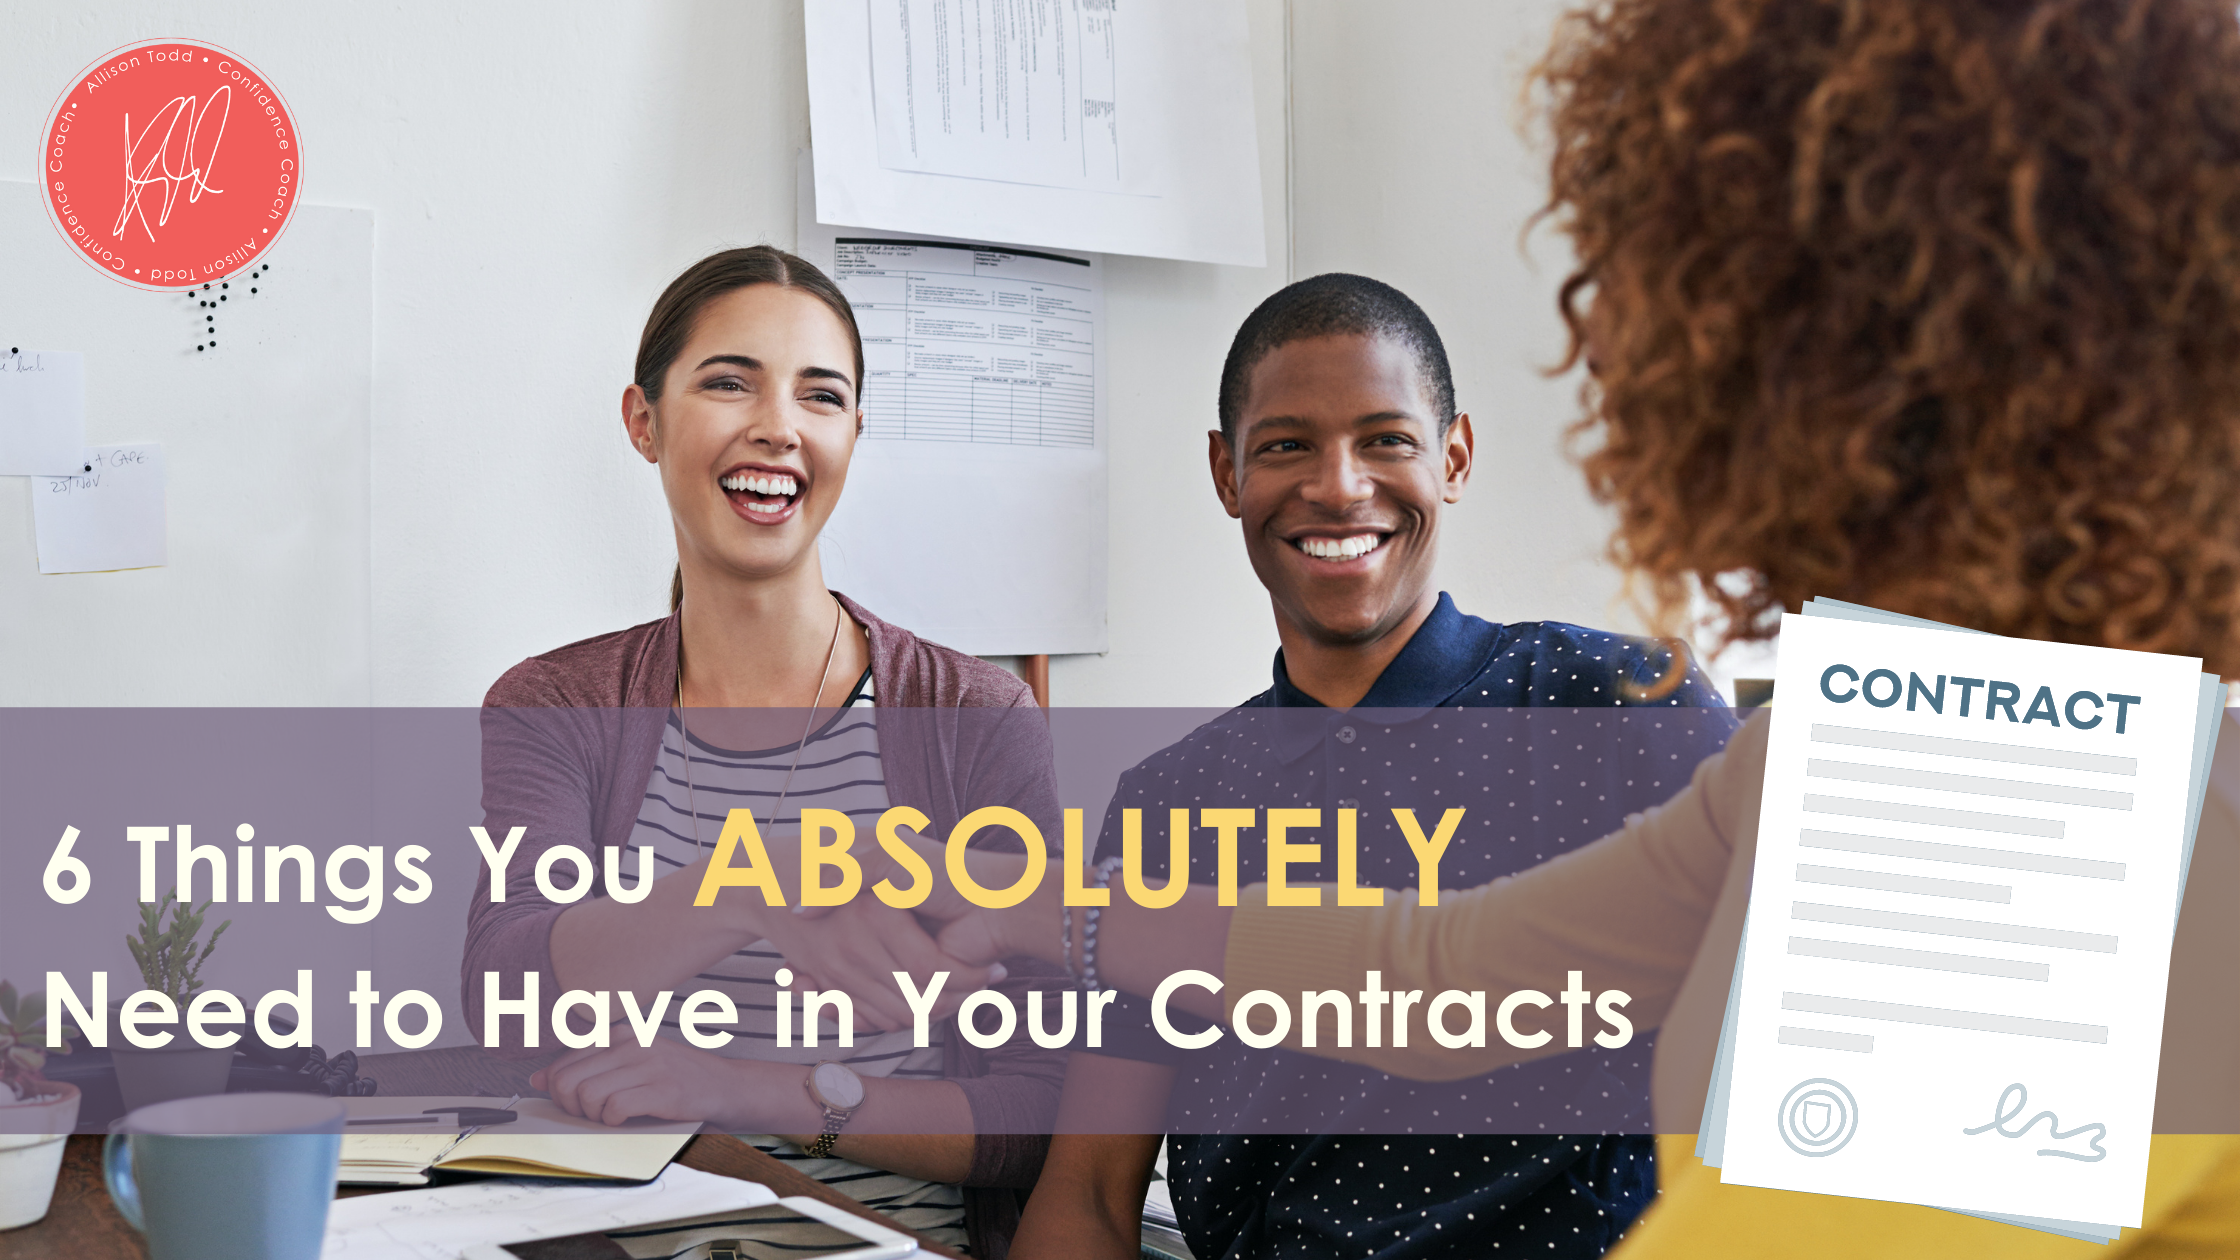 6 Things You Absolutely Need to Have in Your Contracts